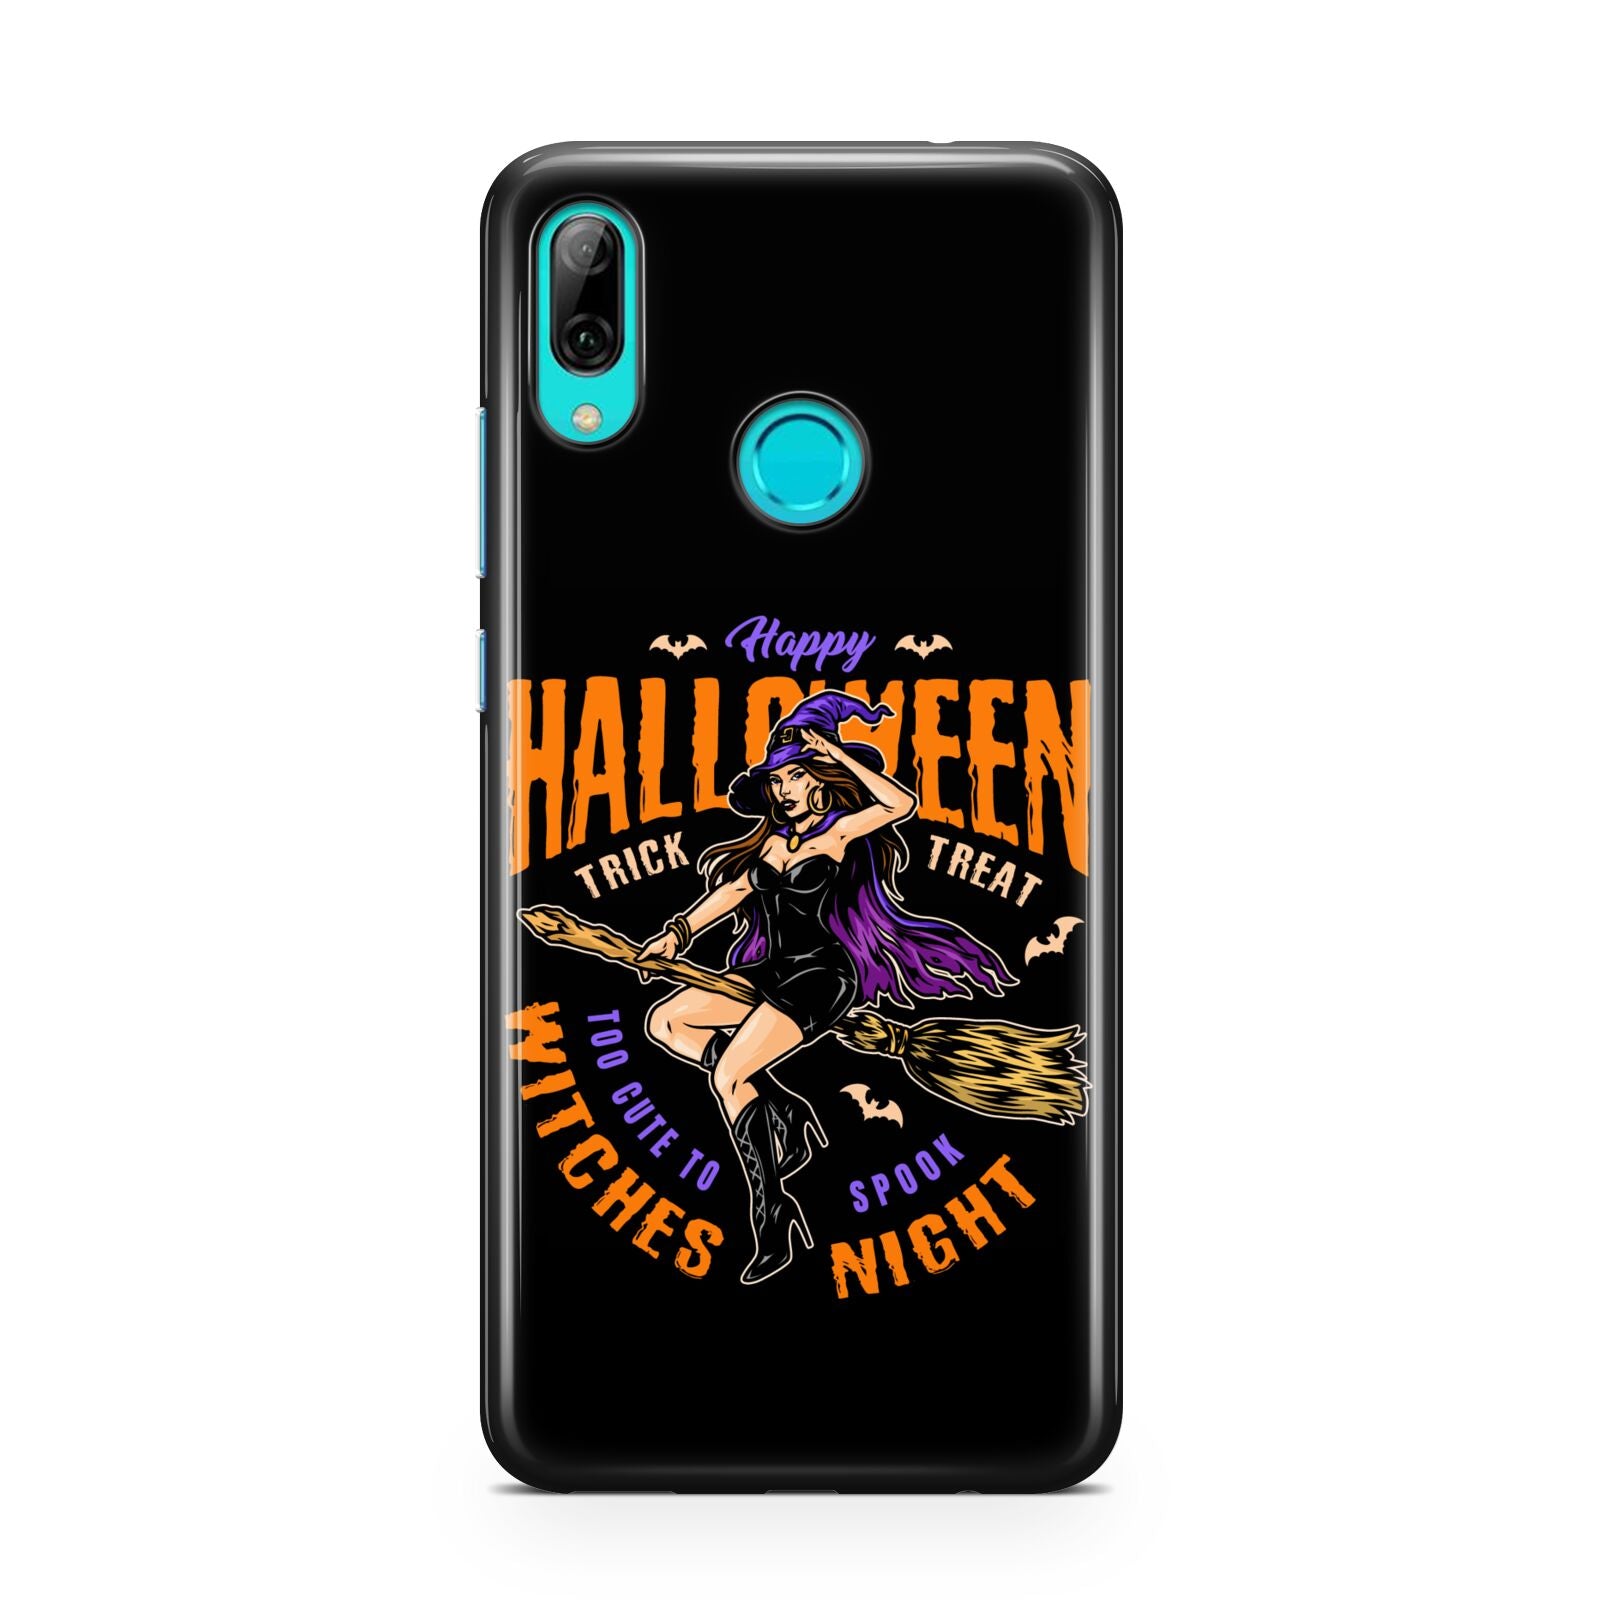 Witches Night Huawei P Smart 2019 Case